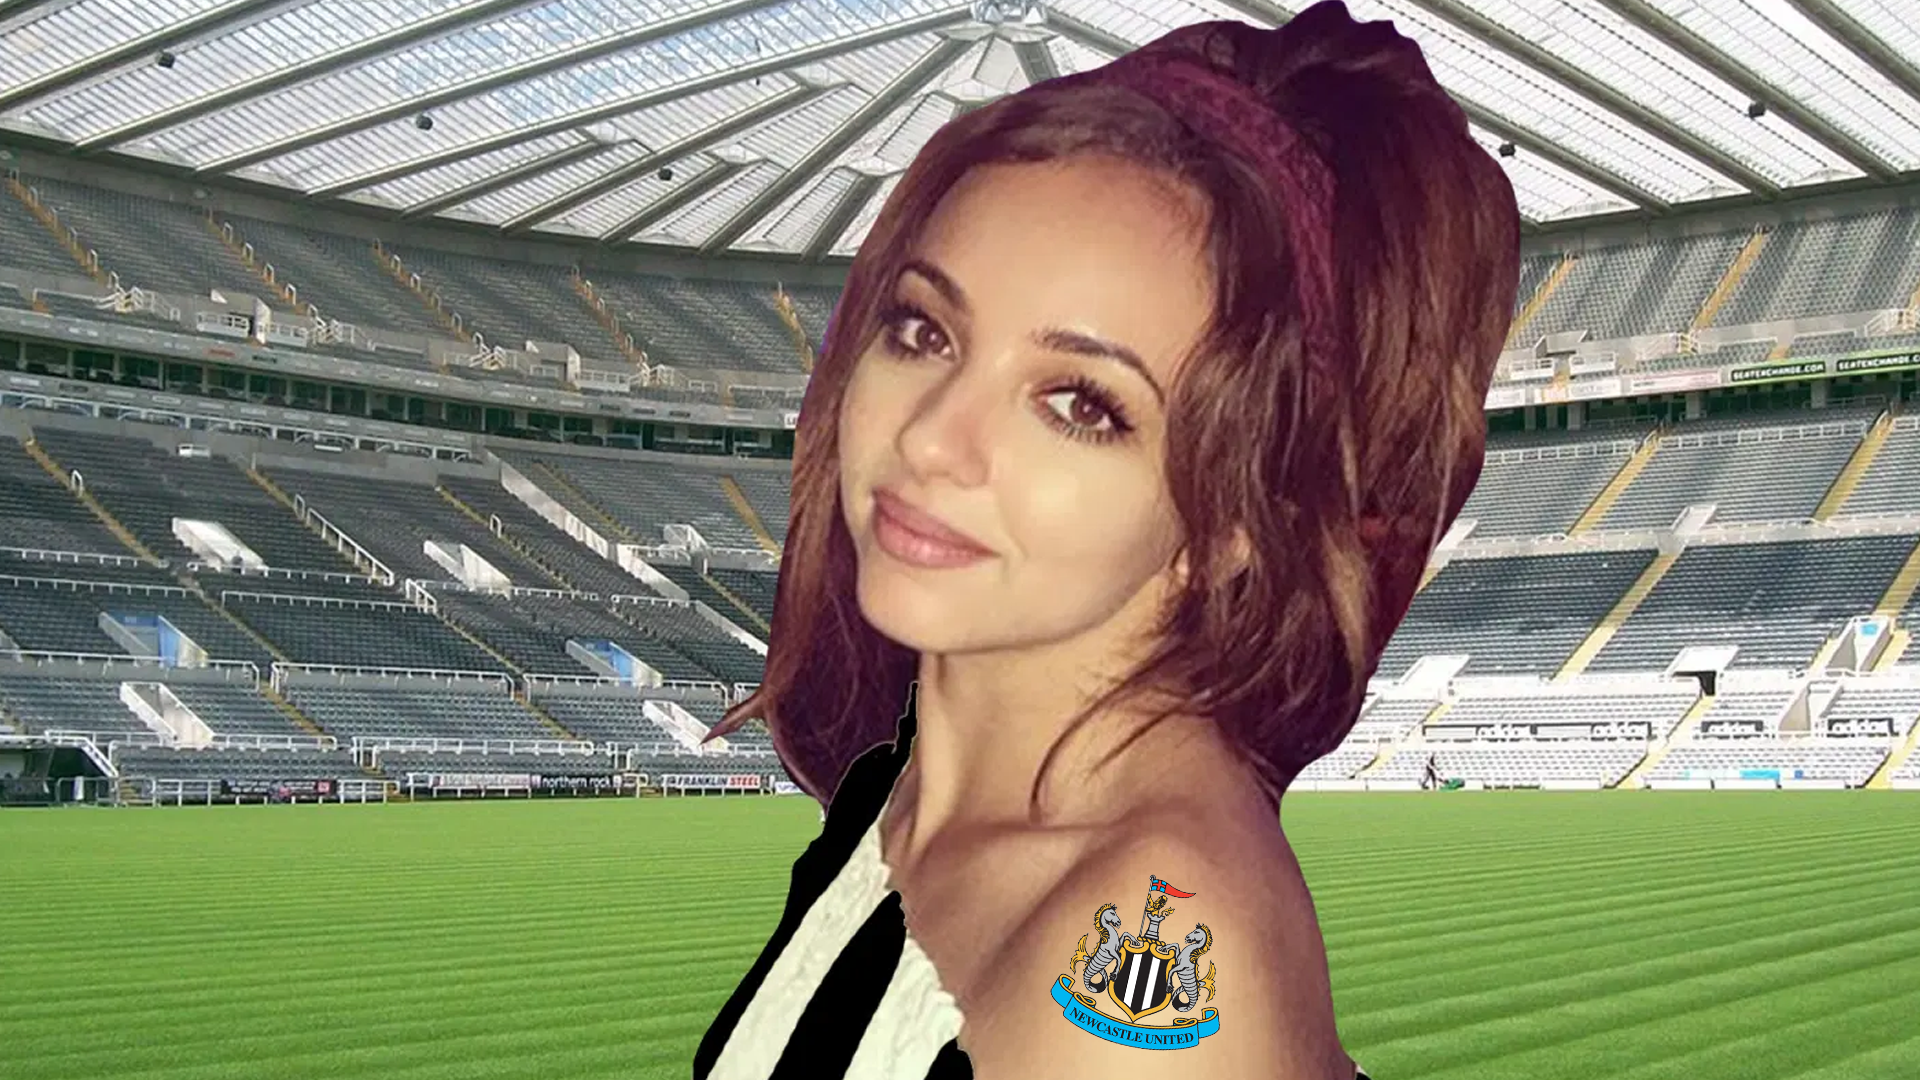 Jade Thirlwall and Newcastle United's stadium in background